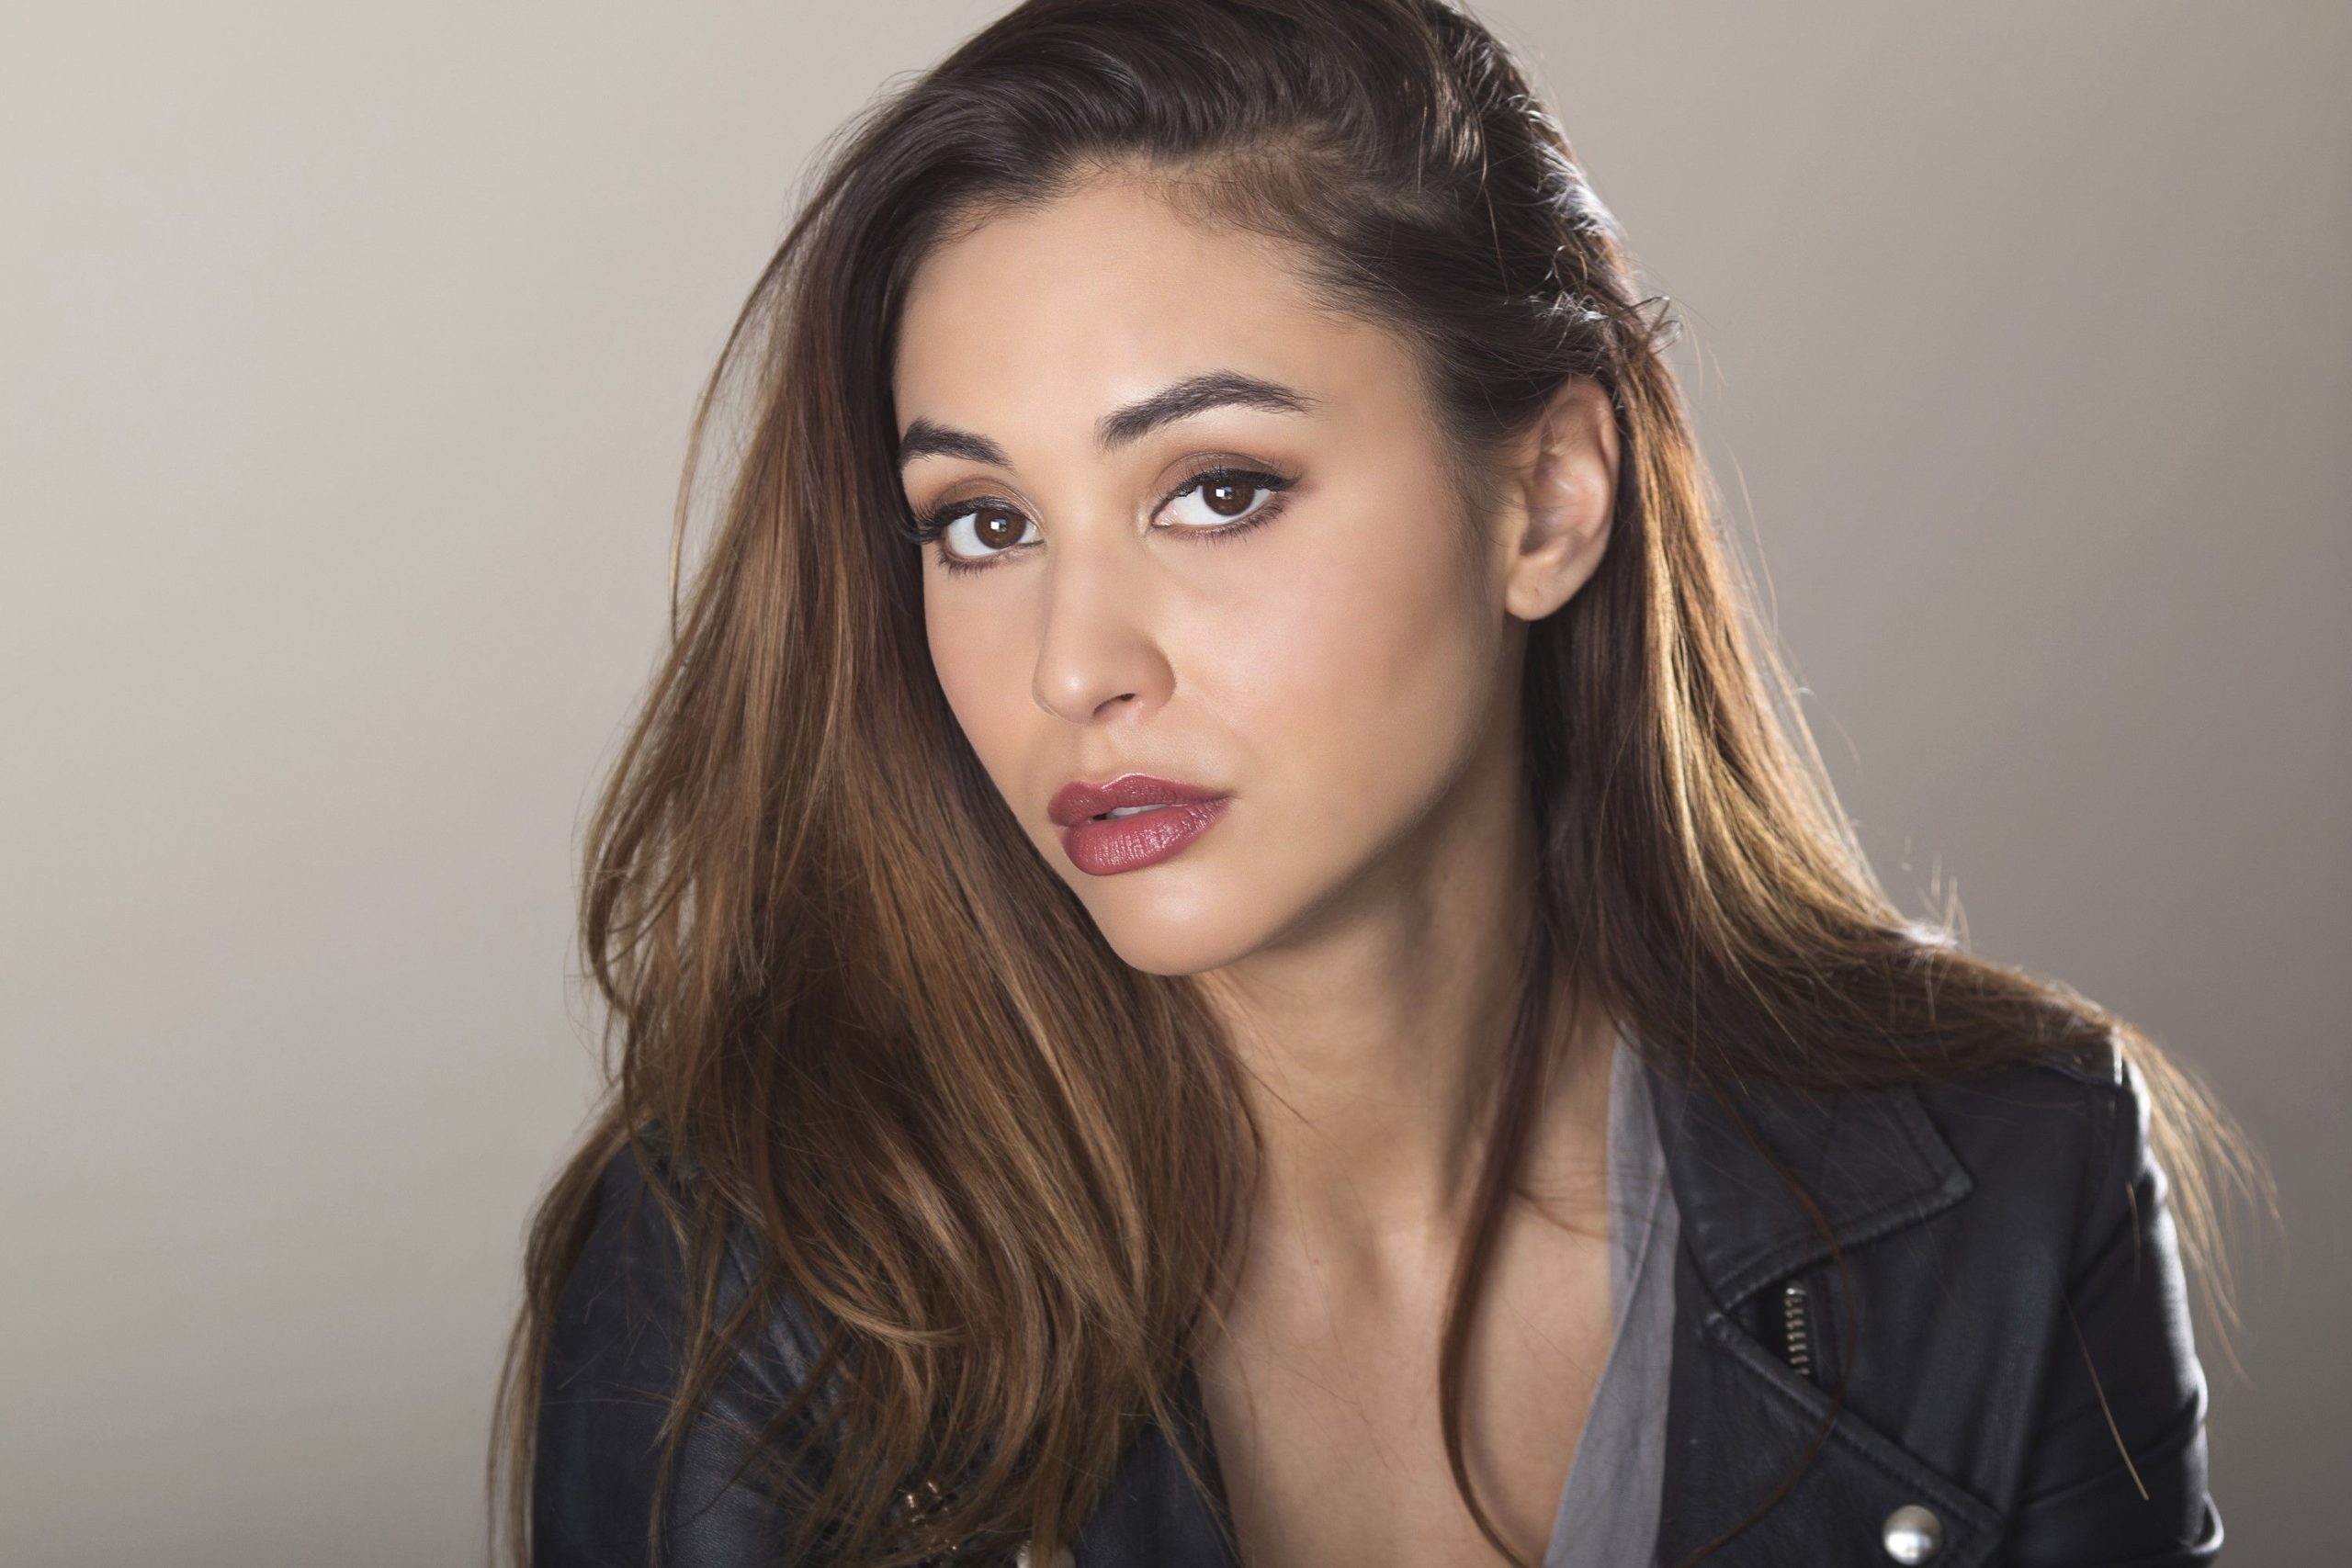 How Rich is Lindsey Morgan